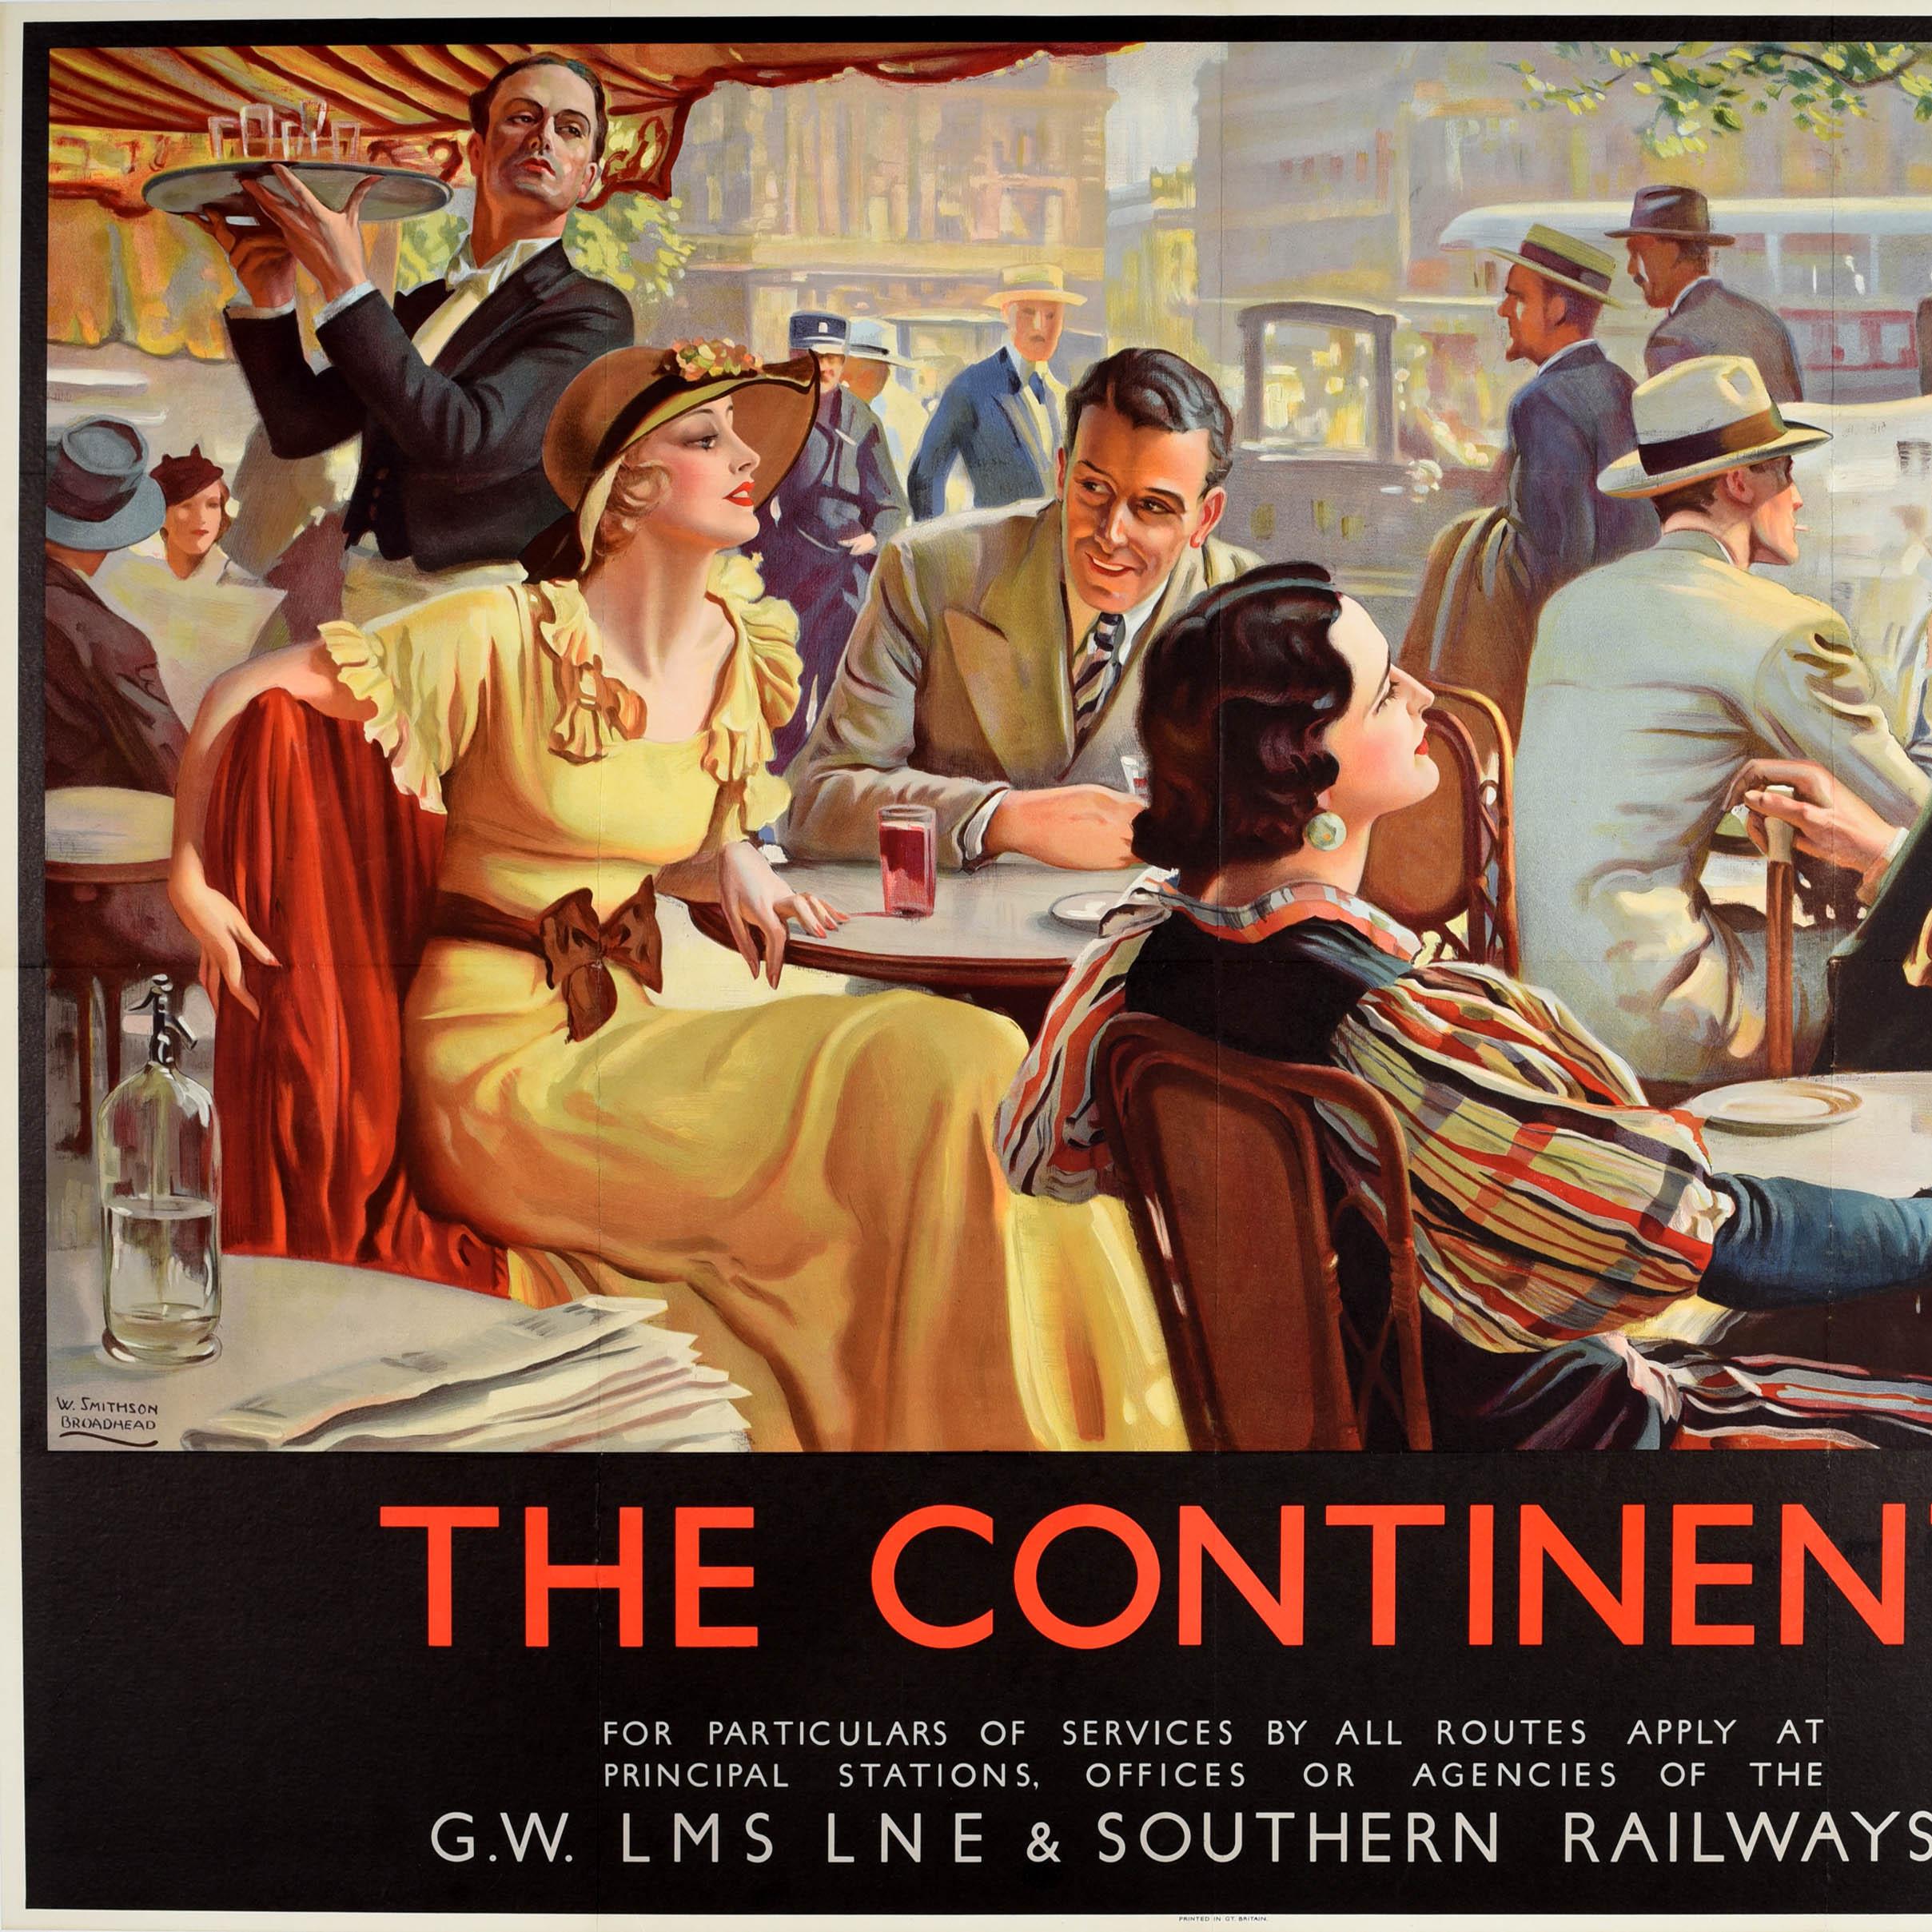 British Original Vintage Travel Poster The Continent LMS Southern Railways Art Deco GWR For Sale